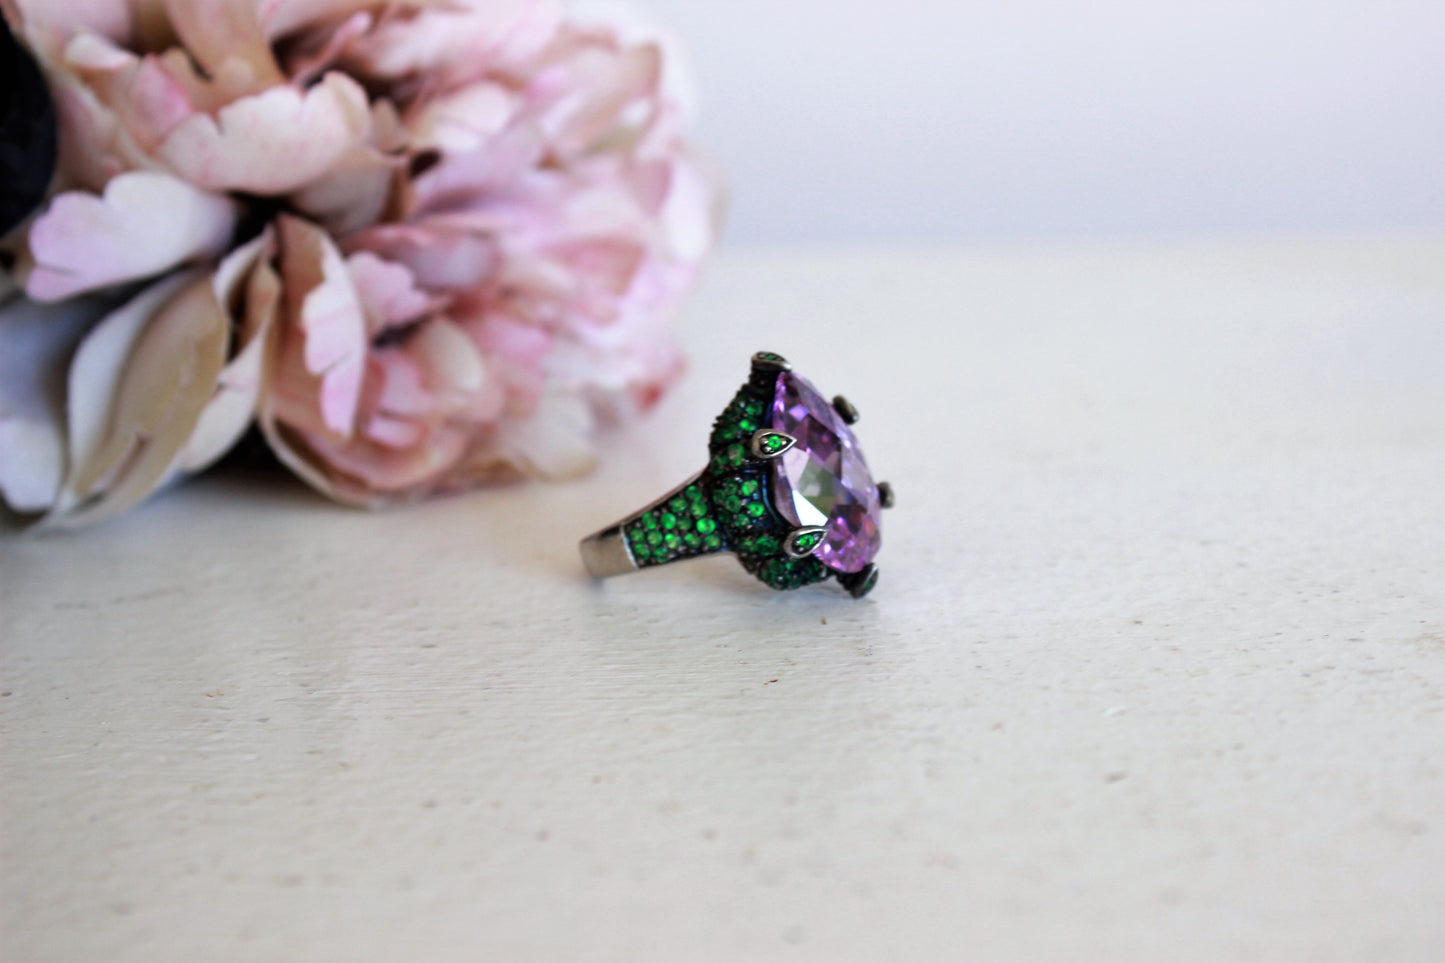 Vintage Statement Ring in Sterlling Silver and Amethyst